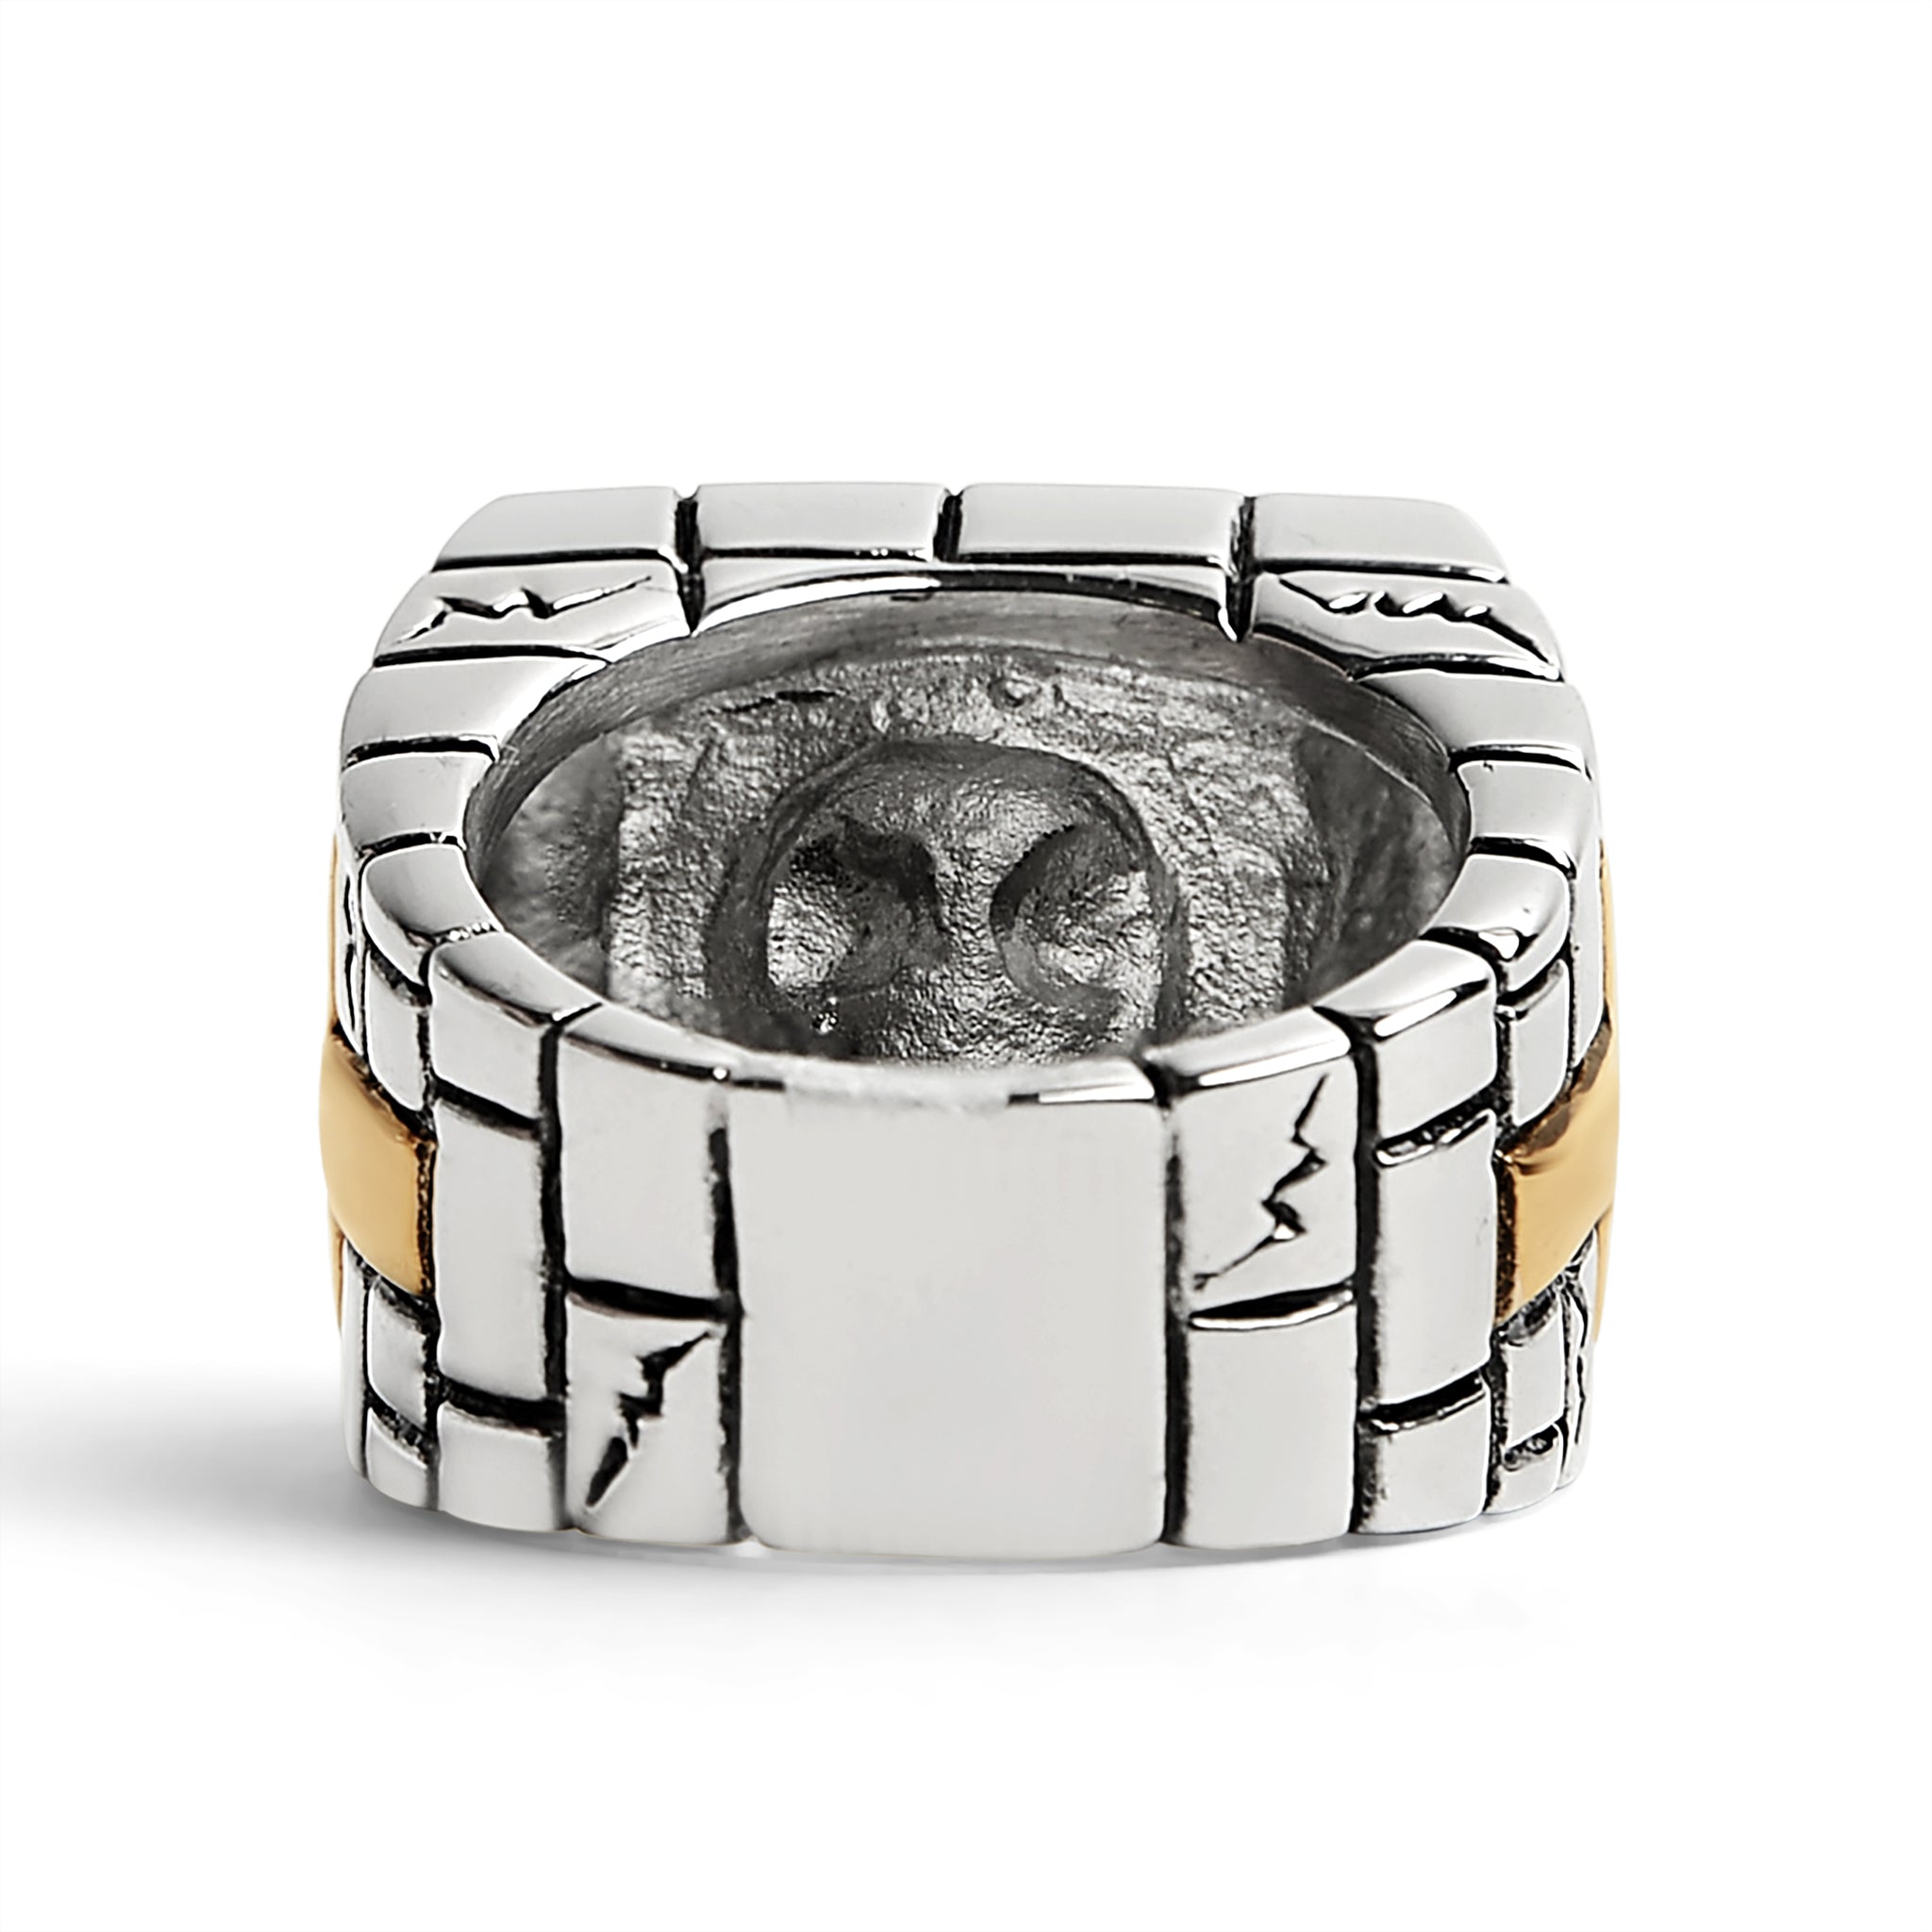 Componeren musicus Bijdragen Detailed Gated Skull Gold Cross Accents Stainless Steel Ring Scr4101 |  Wholesale Jewelry Website